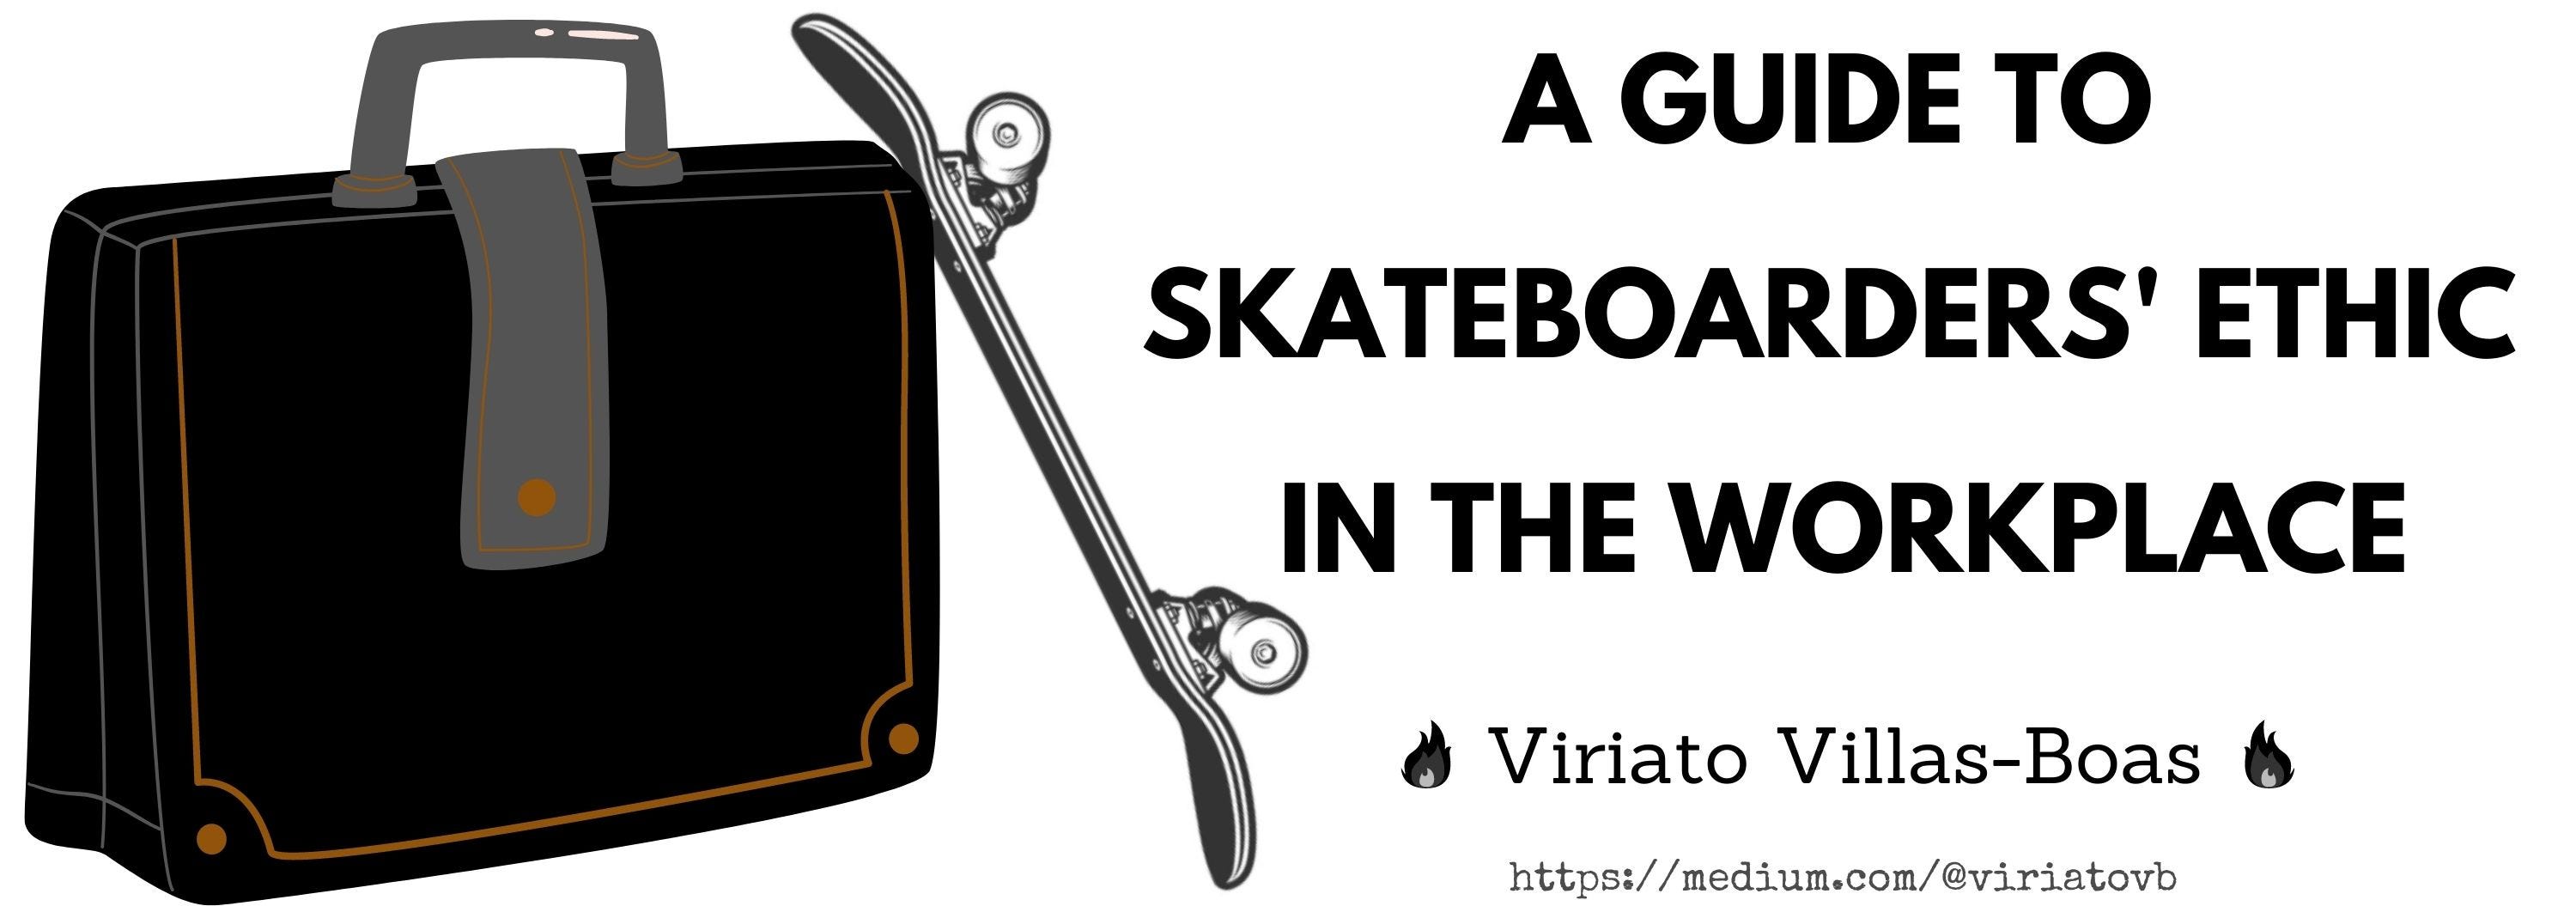 A Guide to Skateboarders' Ethic in the Workplace | by Viriato Villas-Boas |  Medium